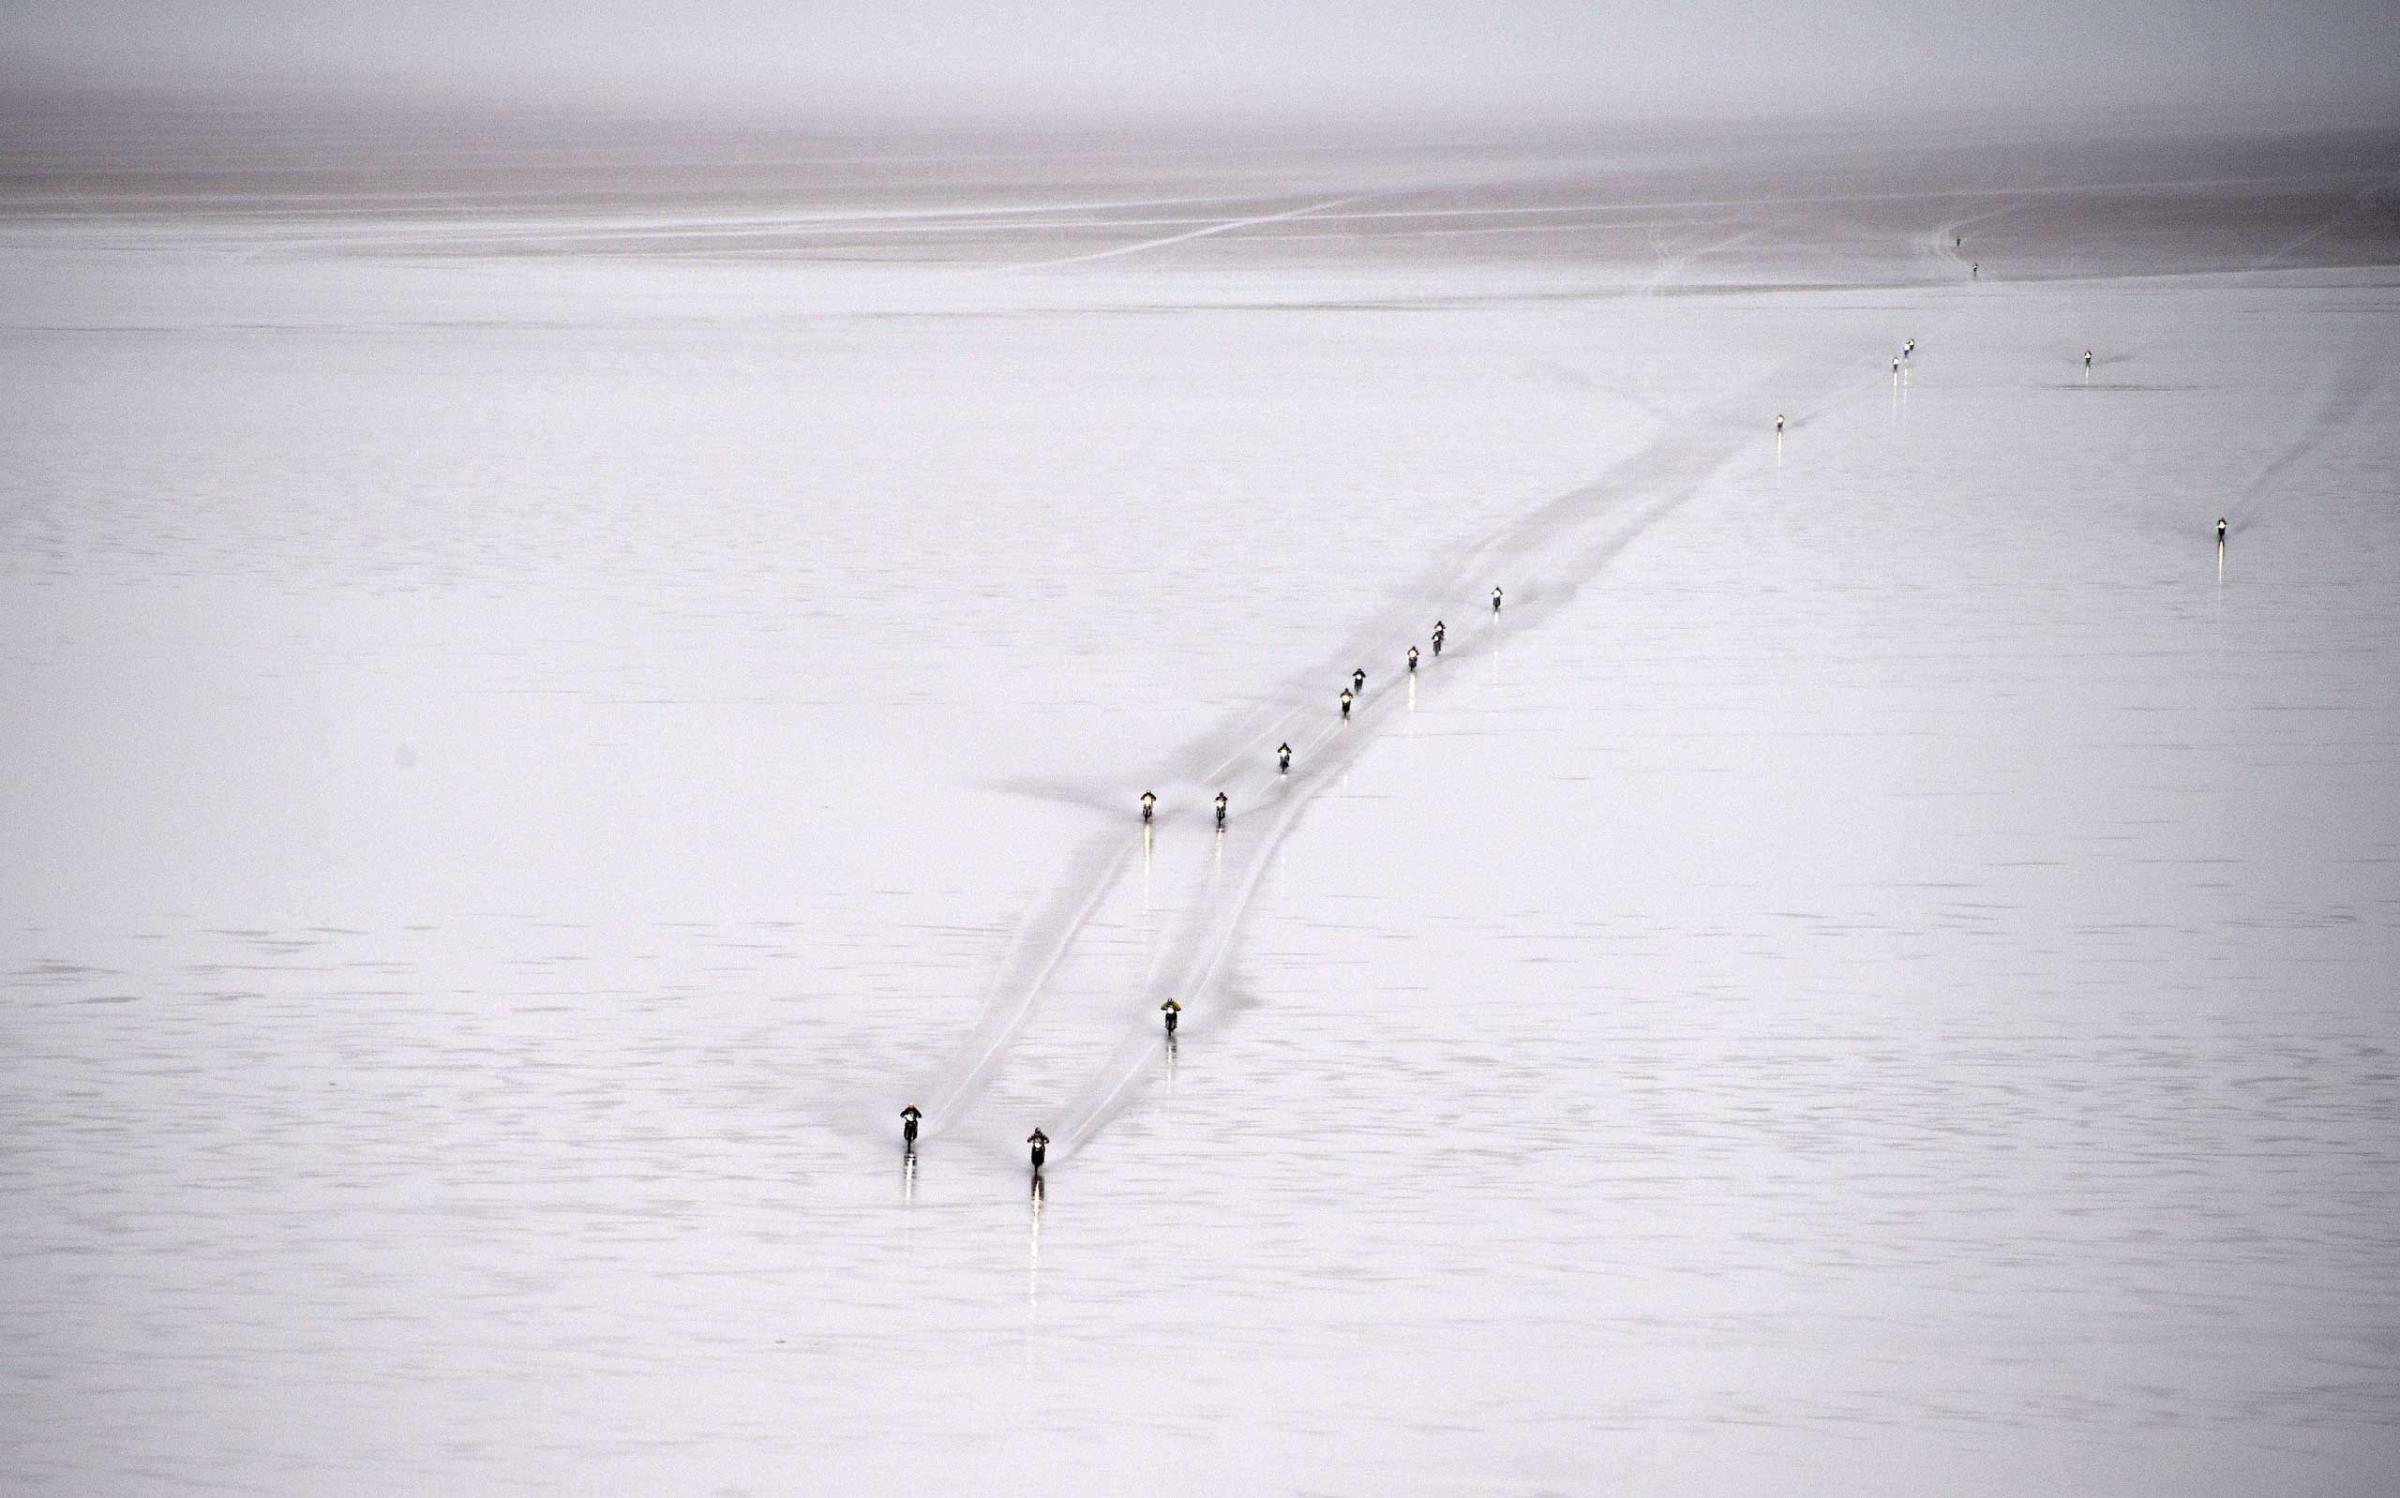 Jan. 12, 2015. Riders compete during 2015 Dakar Rally stage 8 between Uyuni, Bolivia and Iquique, Chile. The Uyuni salt flat is the largest in the world, located in Bolivia near the crest of the Andes, 12,000 ft. above sea level.